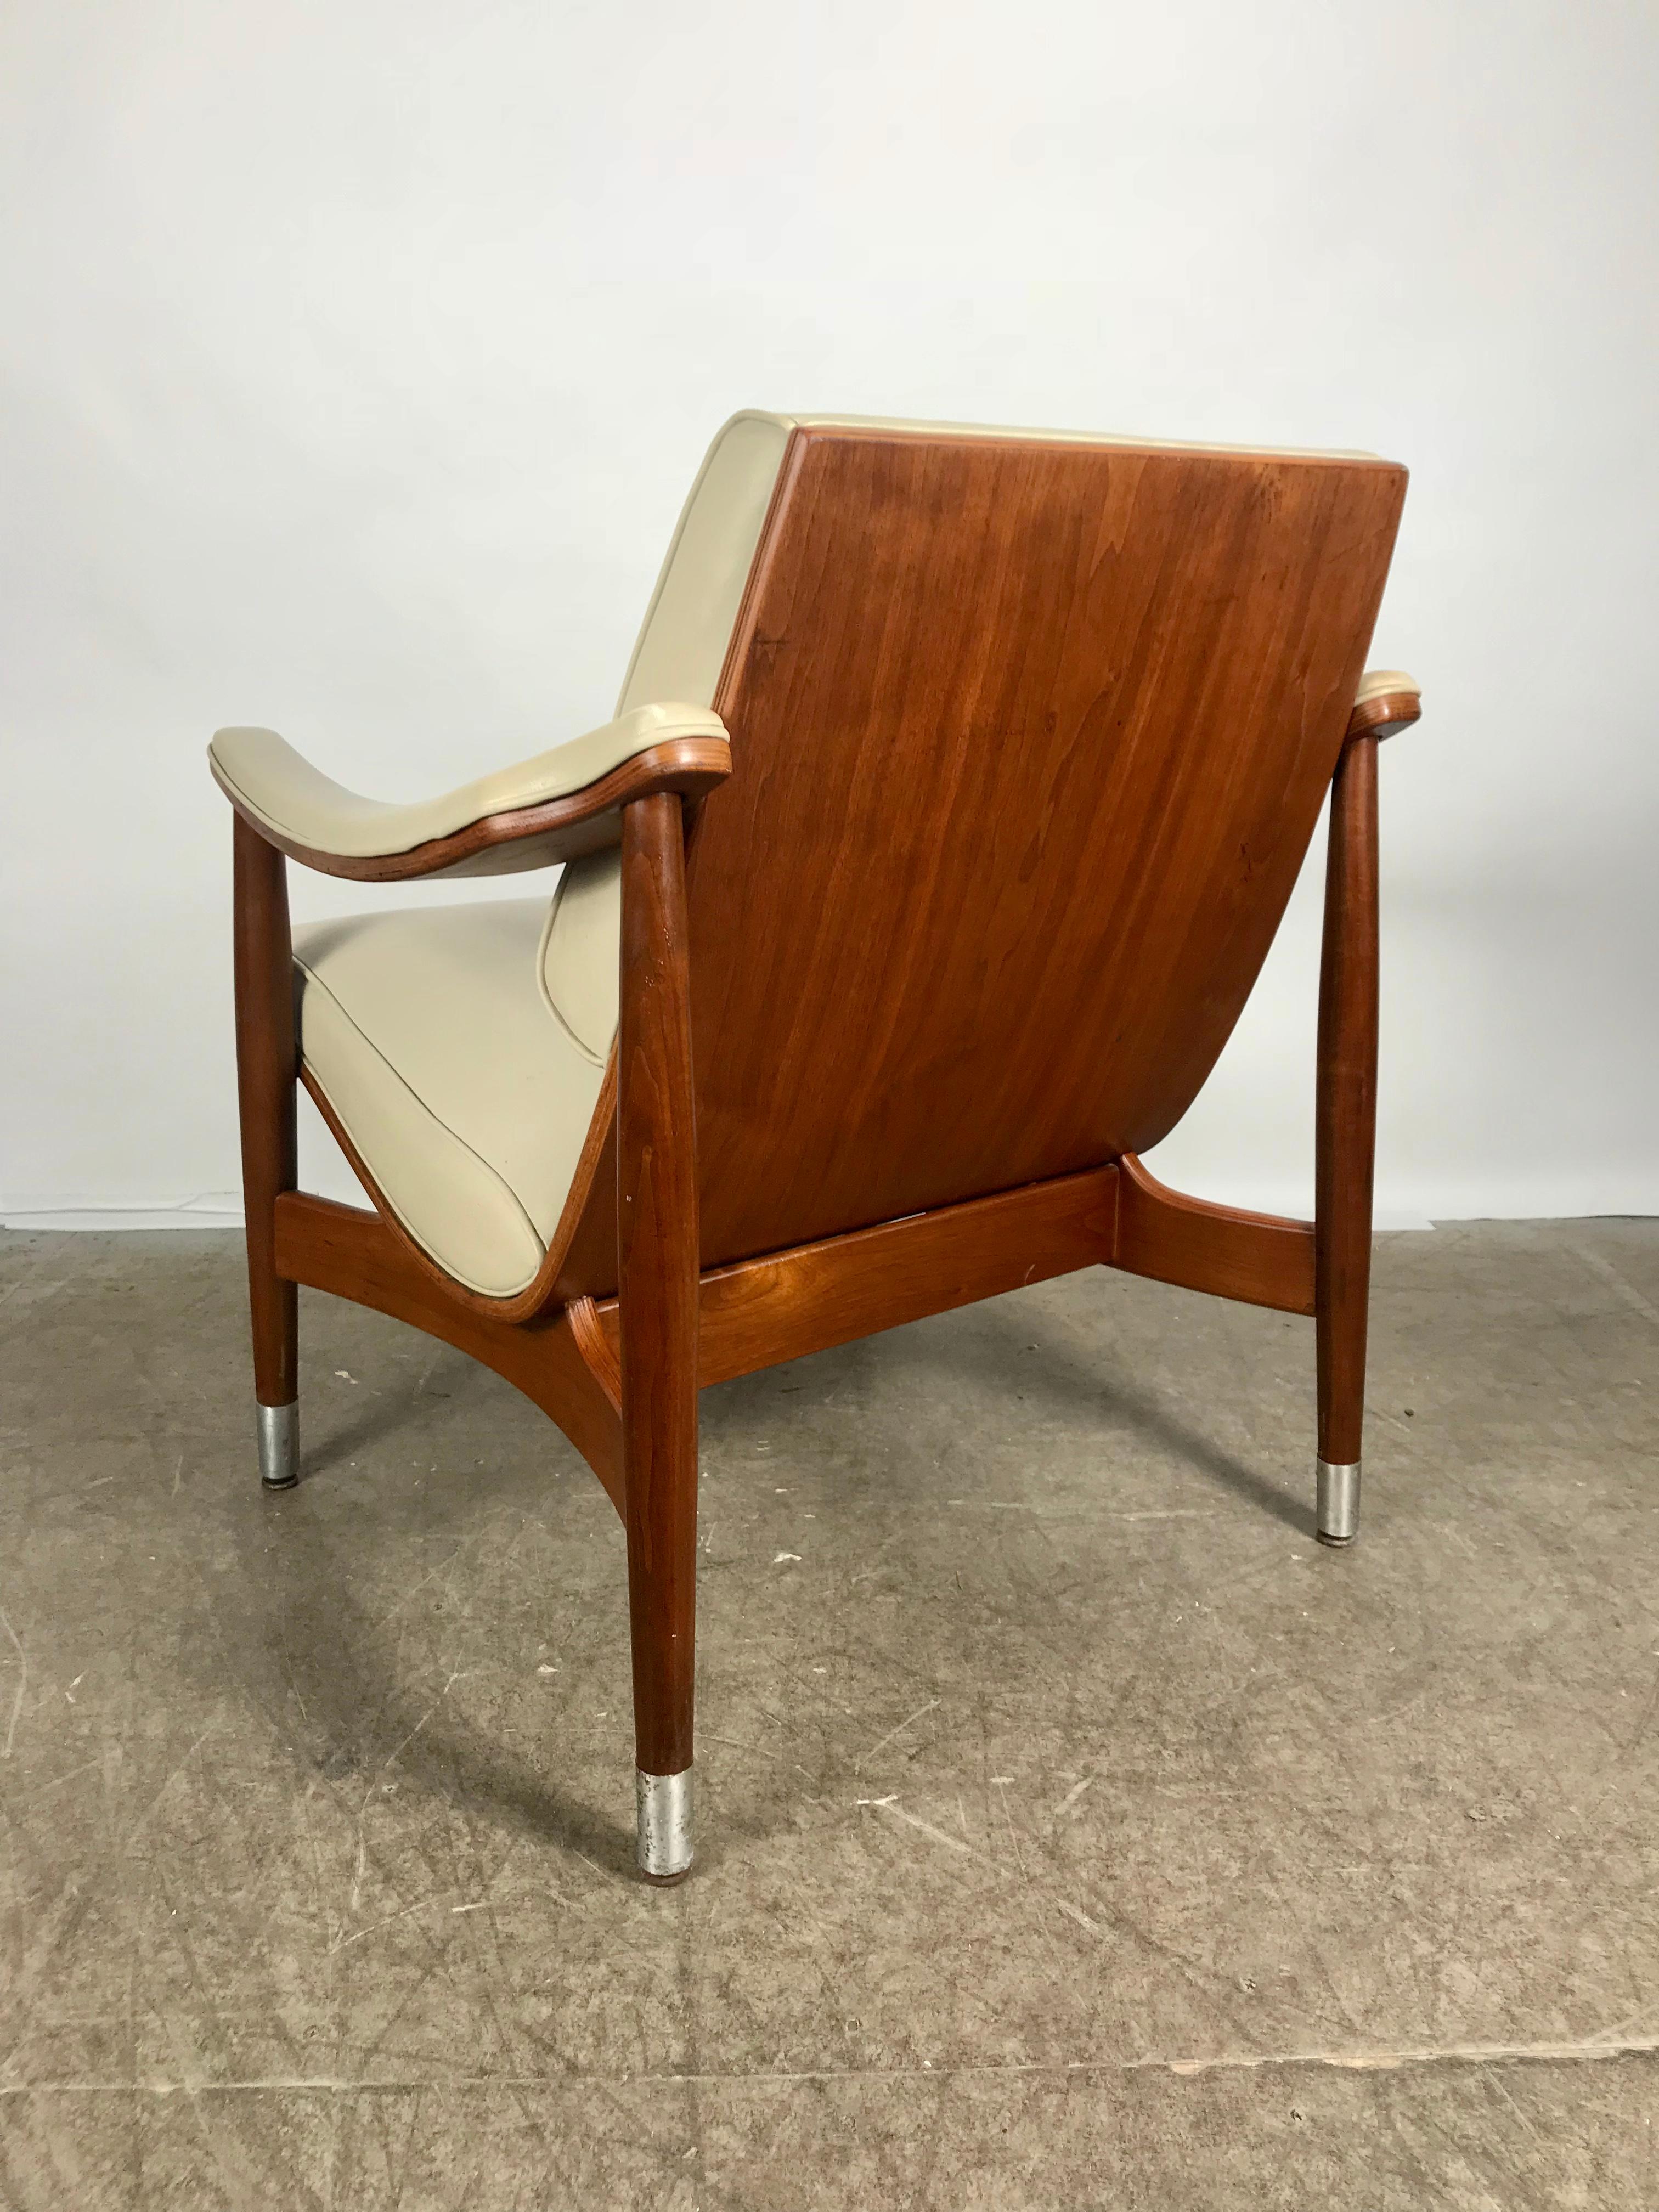 20th Century Classic Mid-Century Modern Plywood Scoop Lounge Chair by Thonet